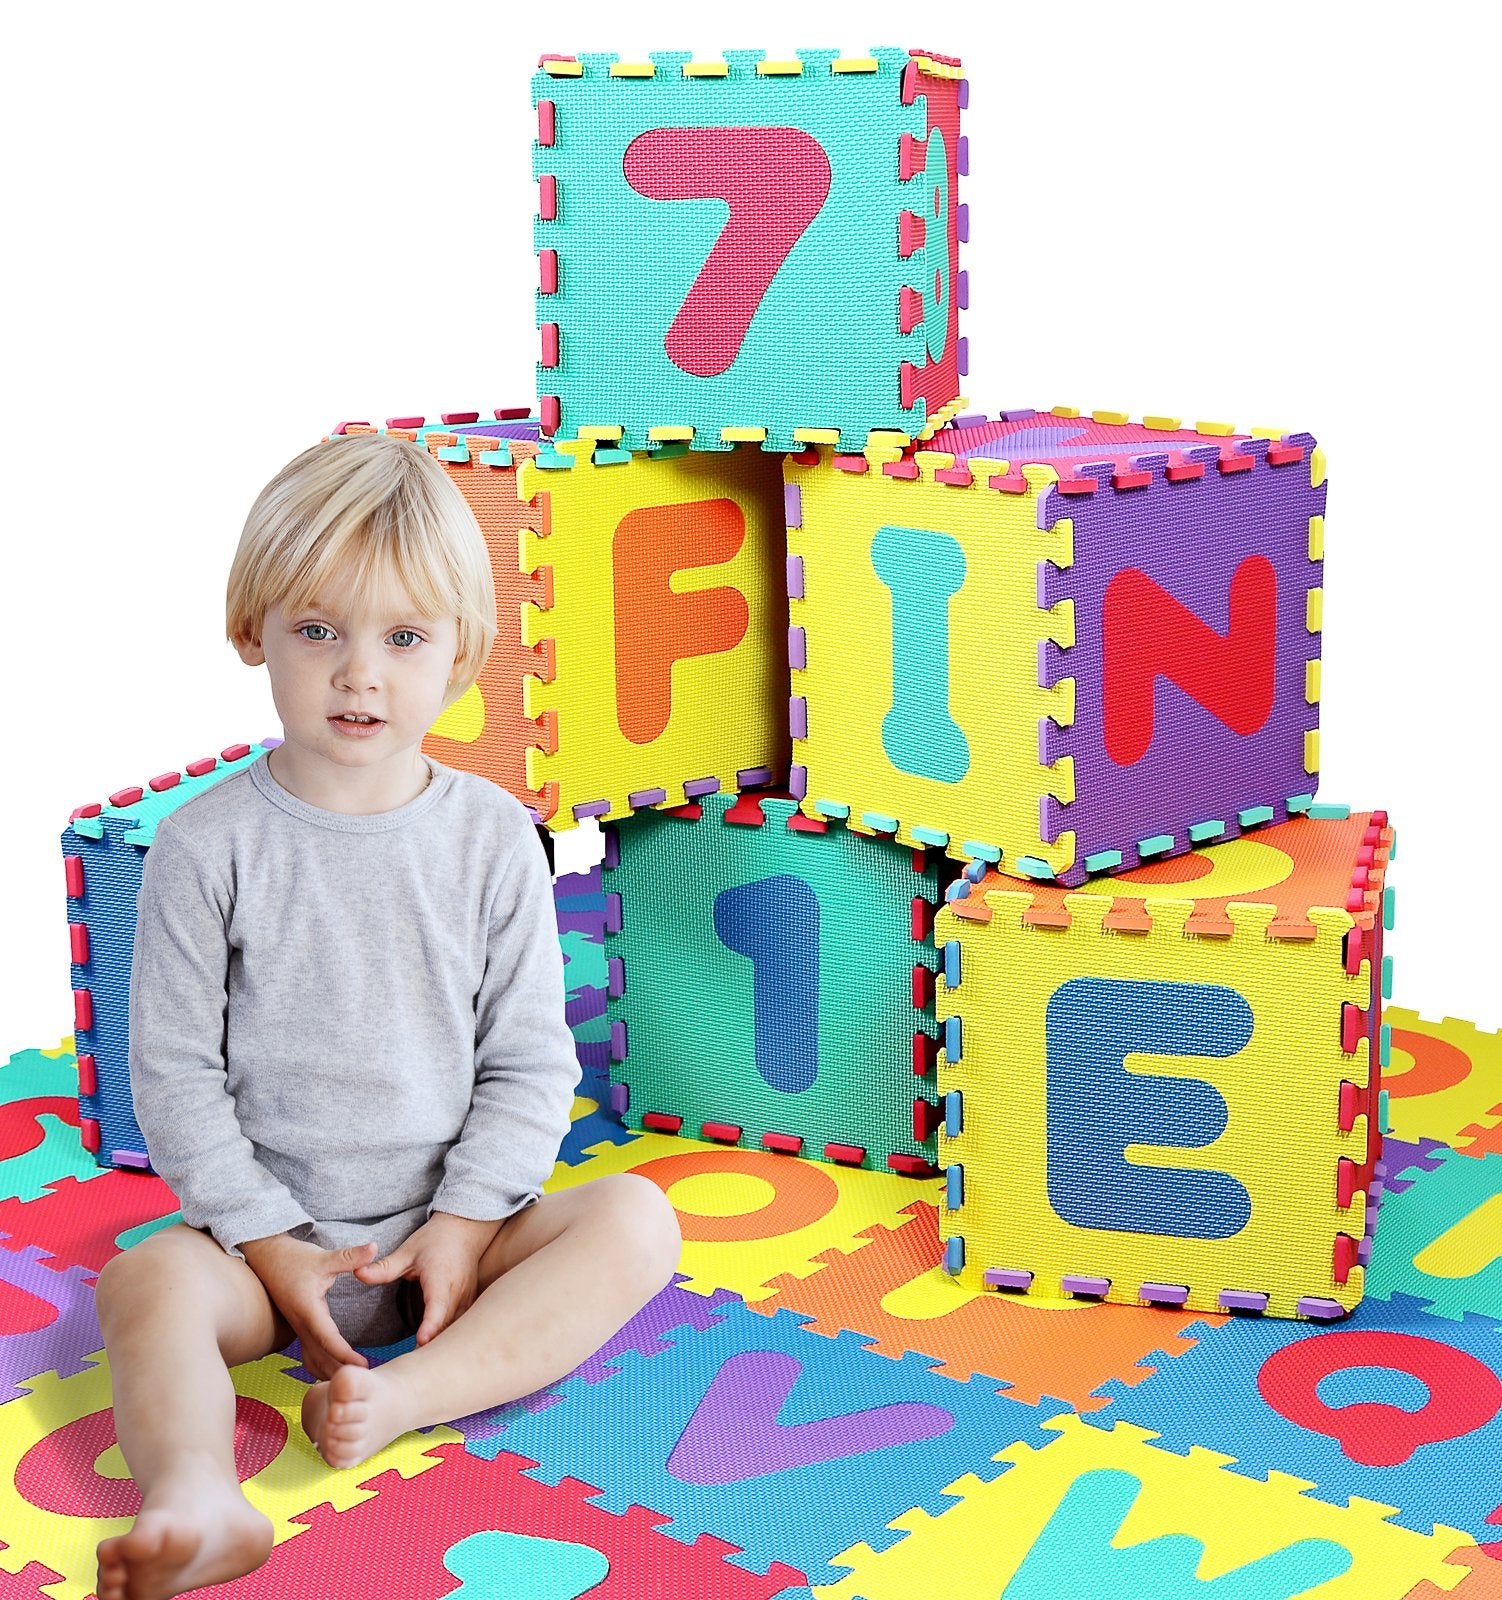 Click N' Play, Alphabet and Numbers Foam Puzzle Play Mat, 36 Tiles (Each Tile Measures 12 X 12 Inch for a Total Coverage of 36 Square Feet)